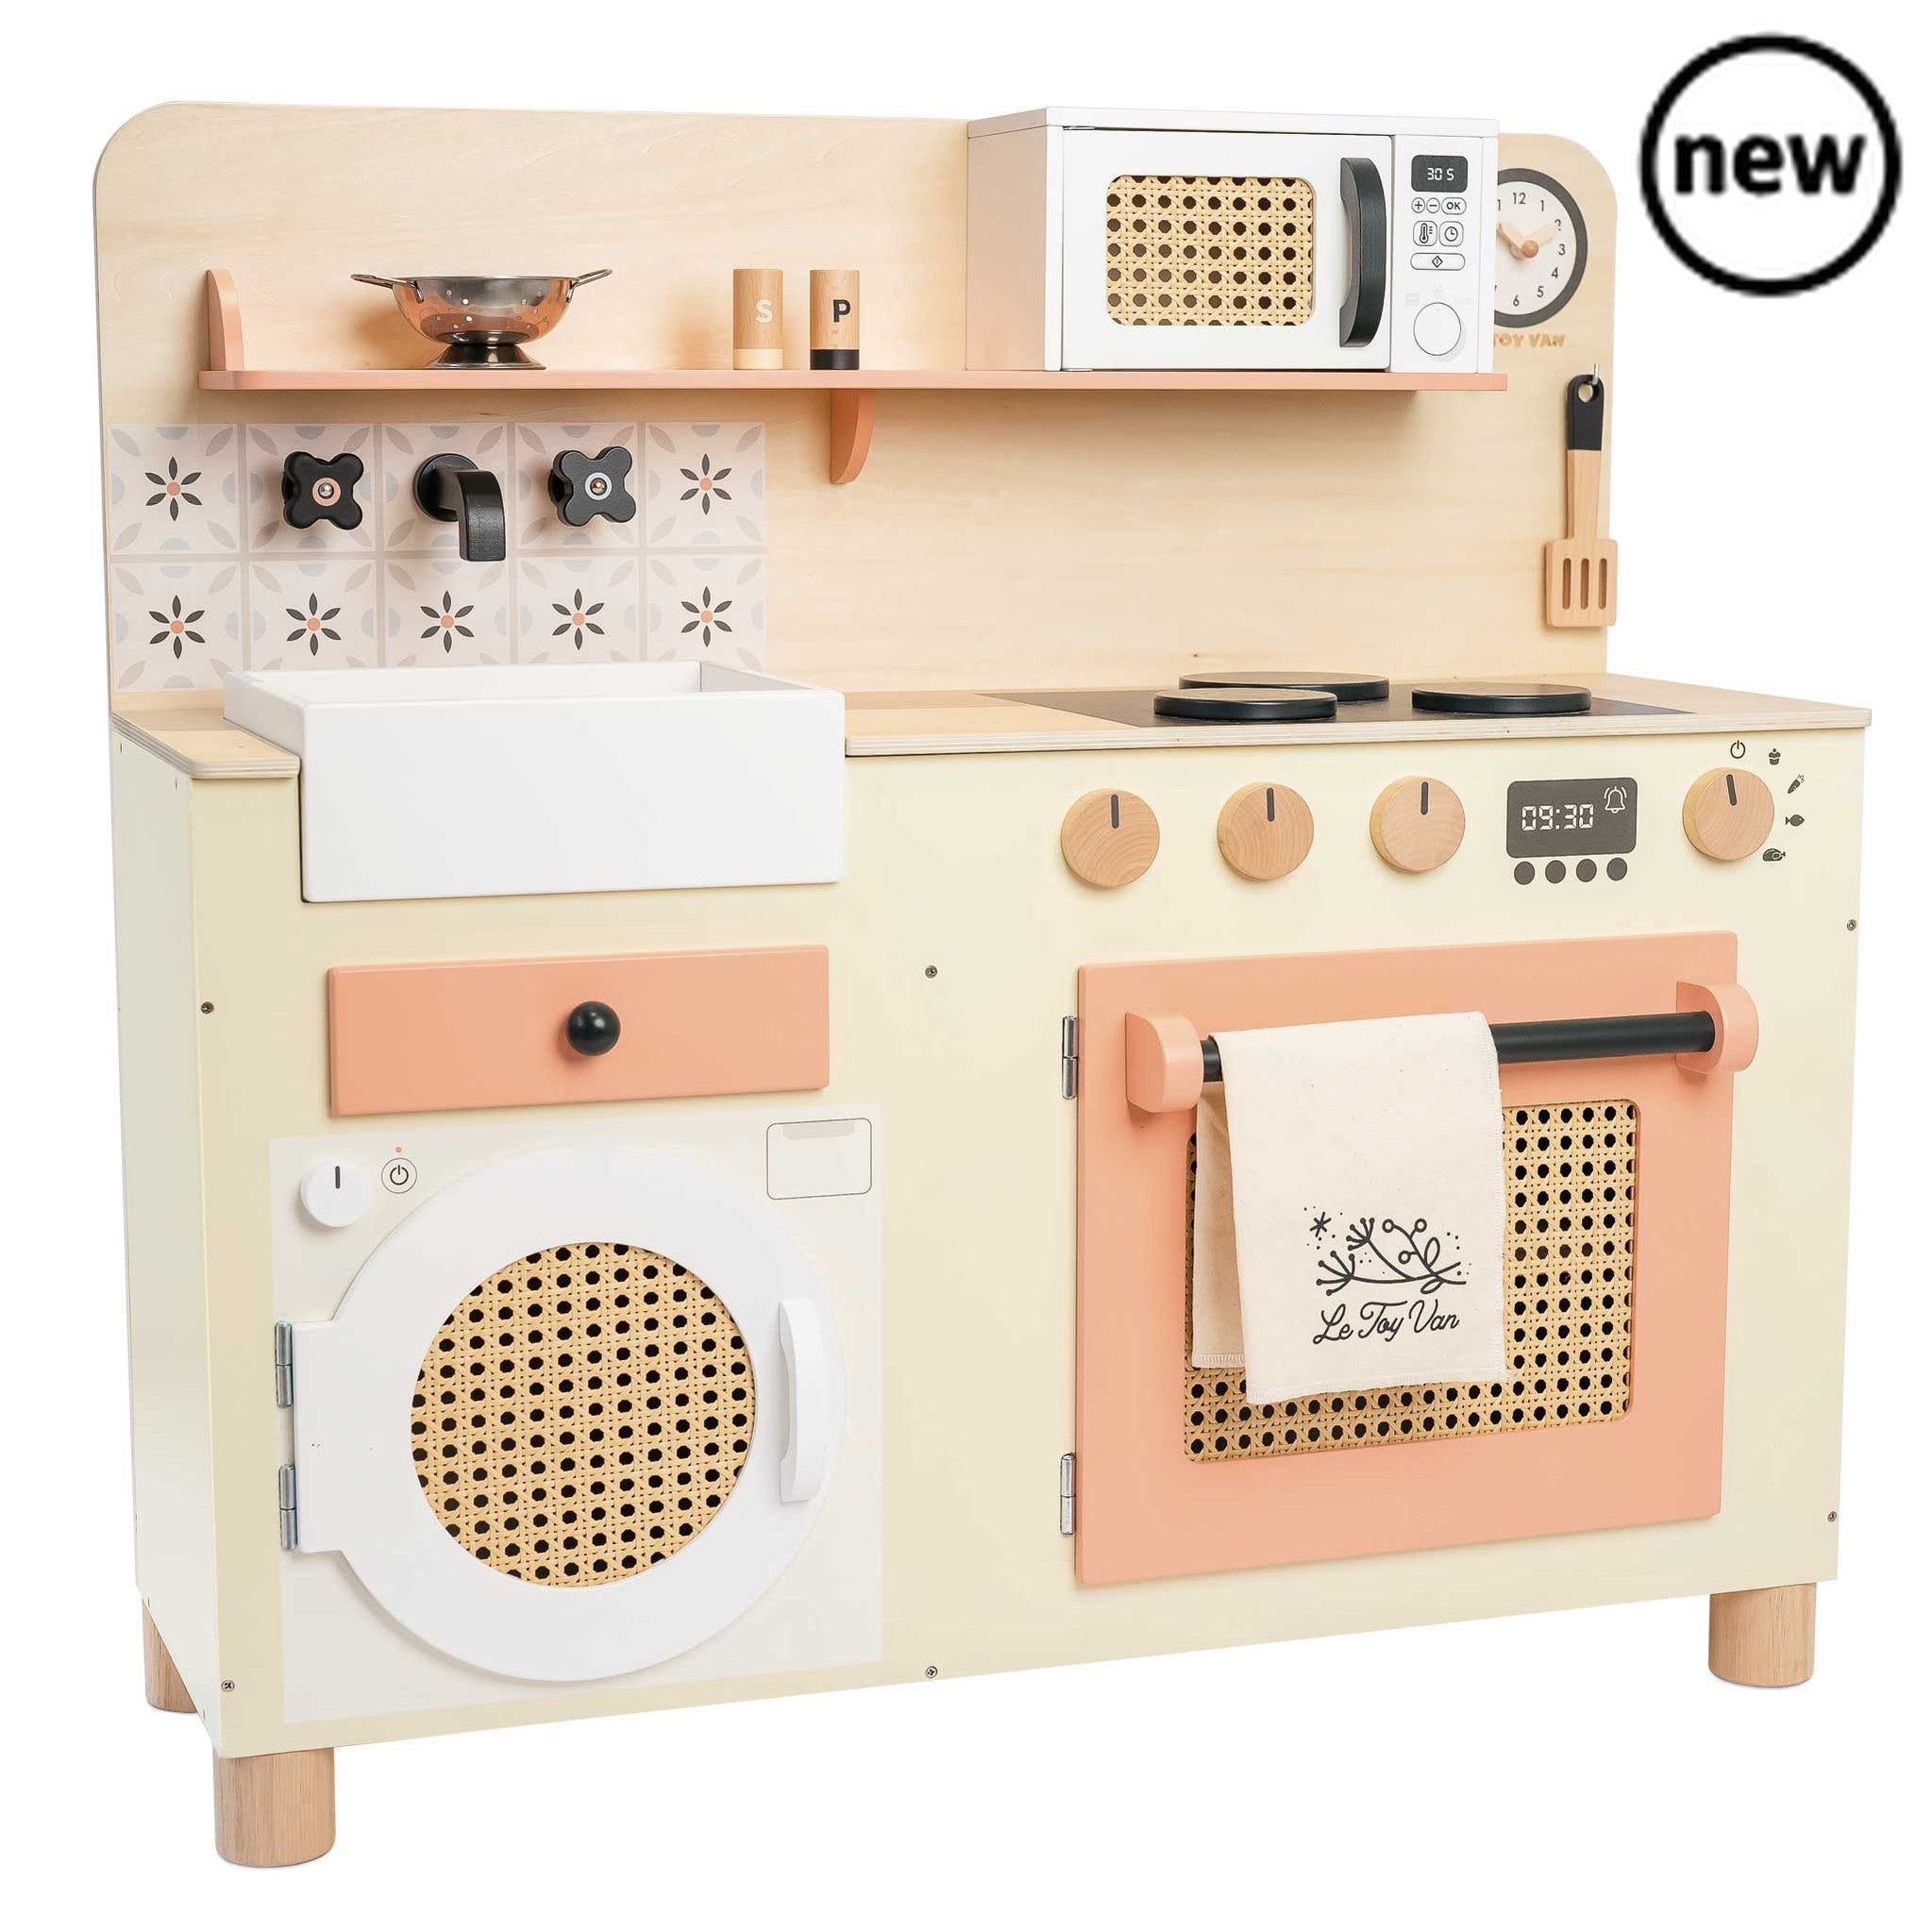 Large Kitchen, Description Cook up some heavenly dishes with this retro style mini wooden kitchen of dreams. Budding bakers will delight with this showstopper that’s packed with interactive features for hours of realistic play value. In a soft pastel and natural wood design, with pretty printed tiles and rattan detailing, this high quality, sustainable toy is made from solid FSC® - certified wood. Discover the butlers sink, oven, washing machine, rotating taps and working oven dials. Plus, there’s a microwa